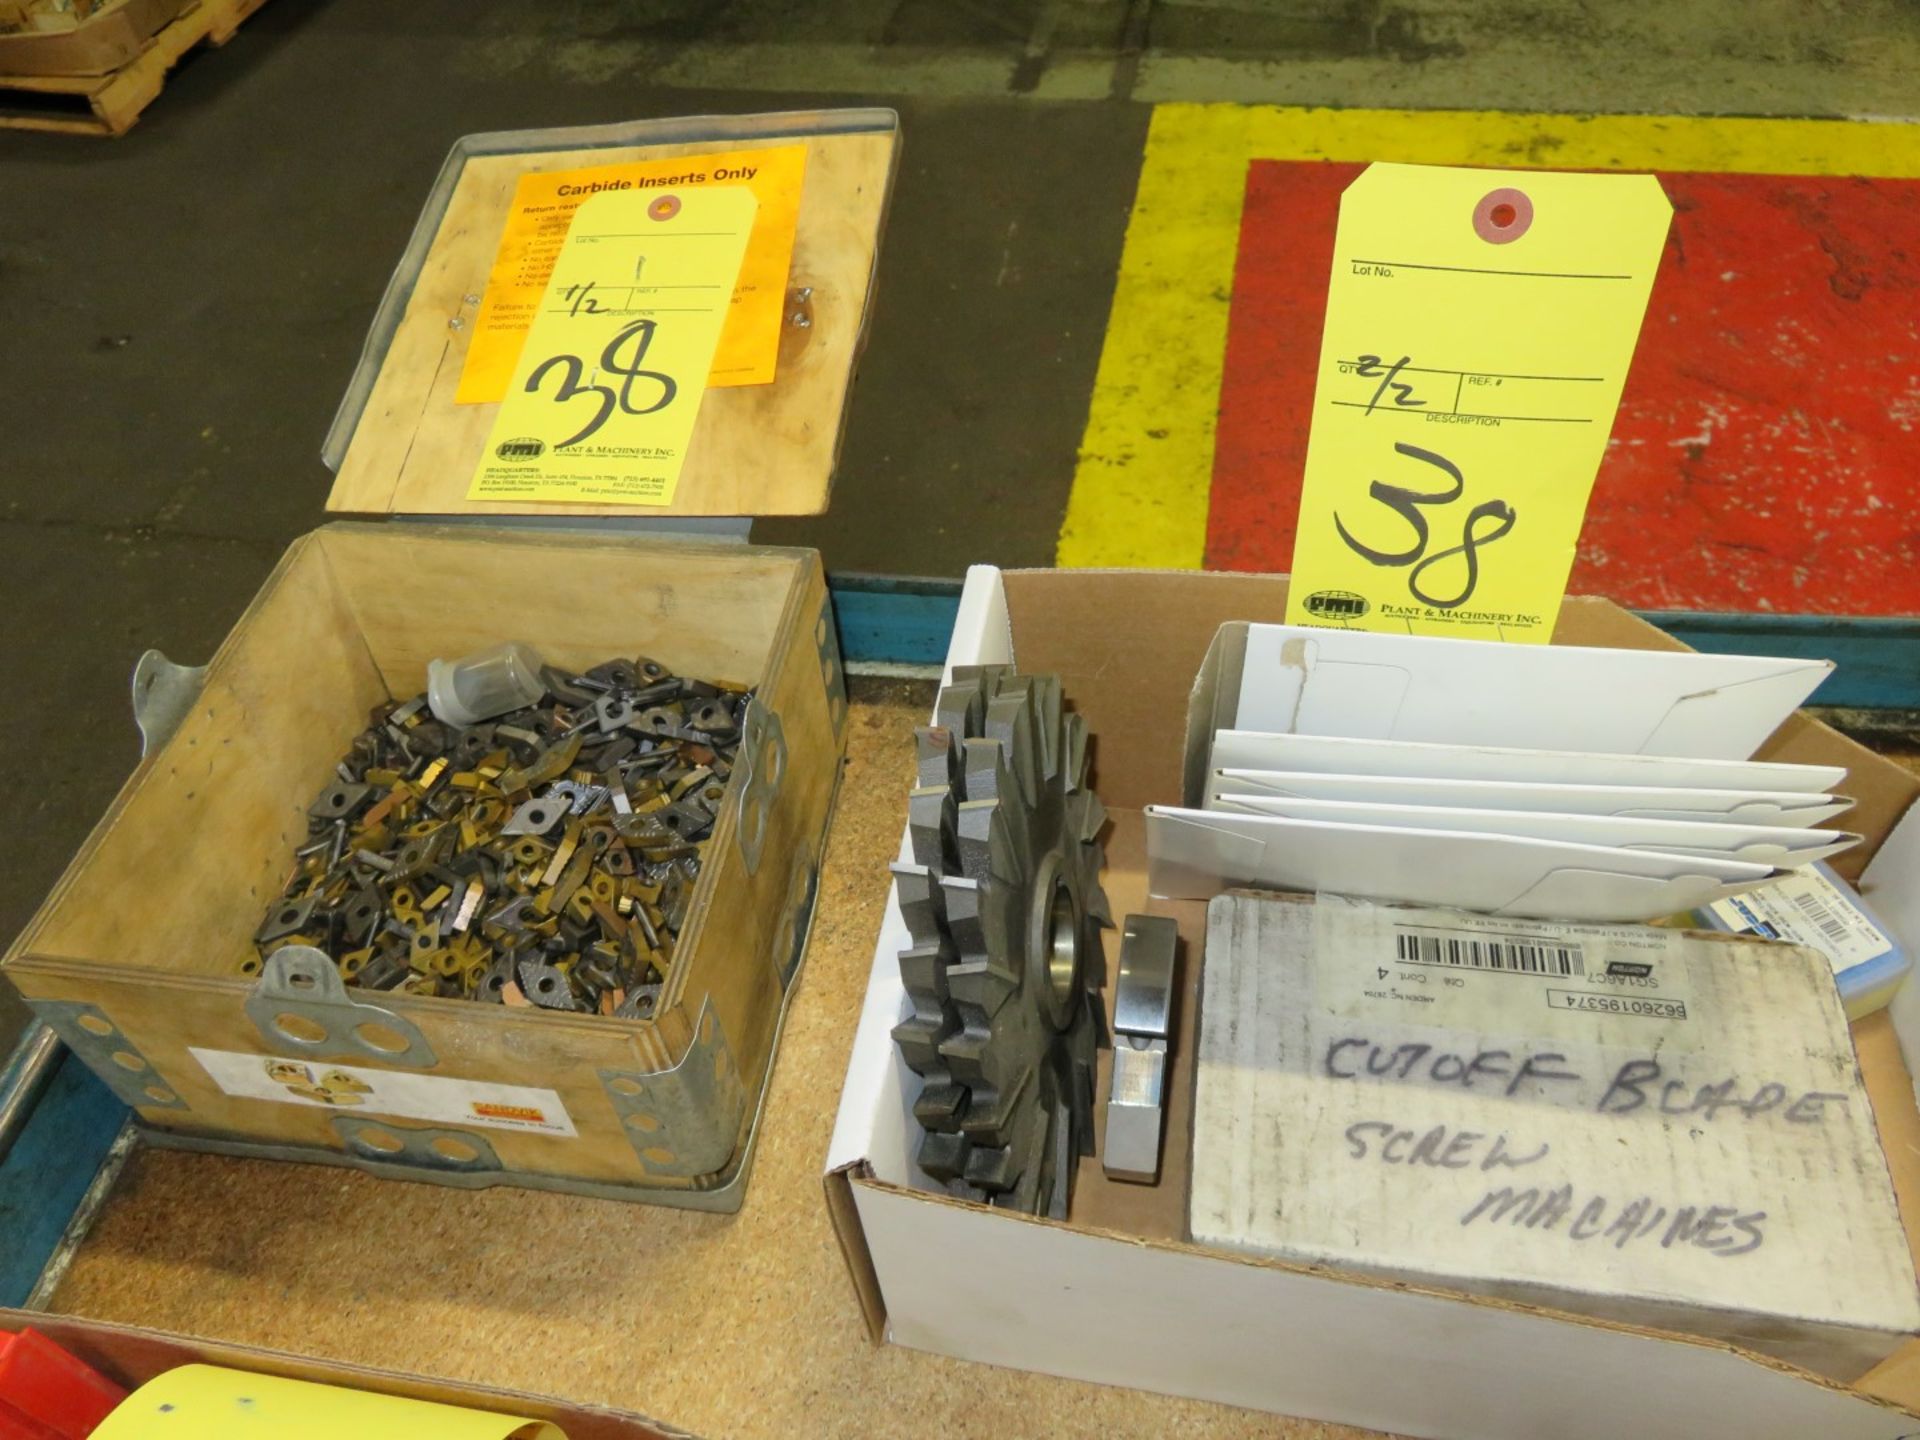 LOT CONSISTING OF carbide inserts, (used), (1) box, cut-off blades & key seat cutters, (new), (1)